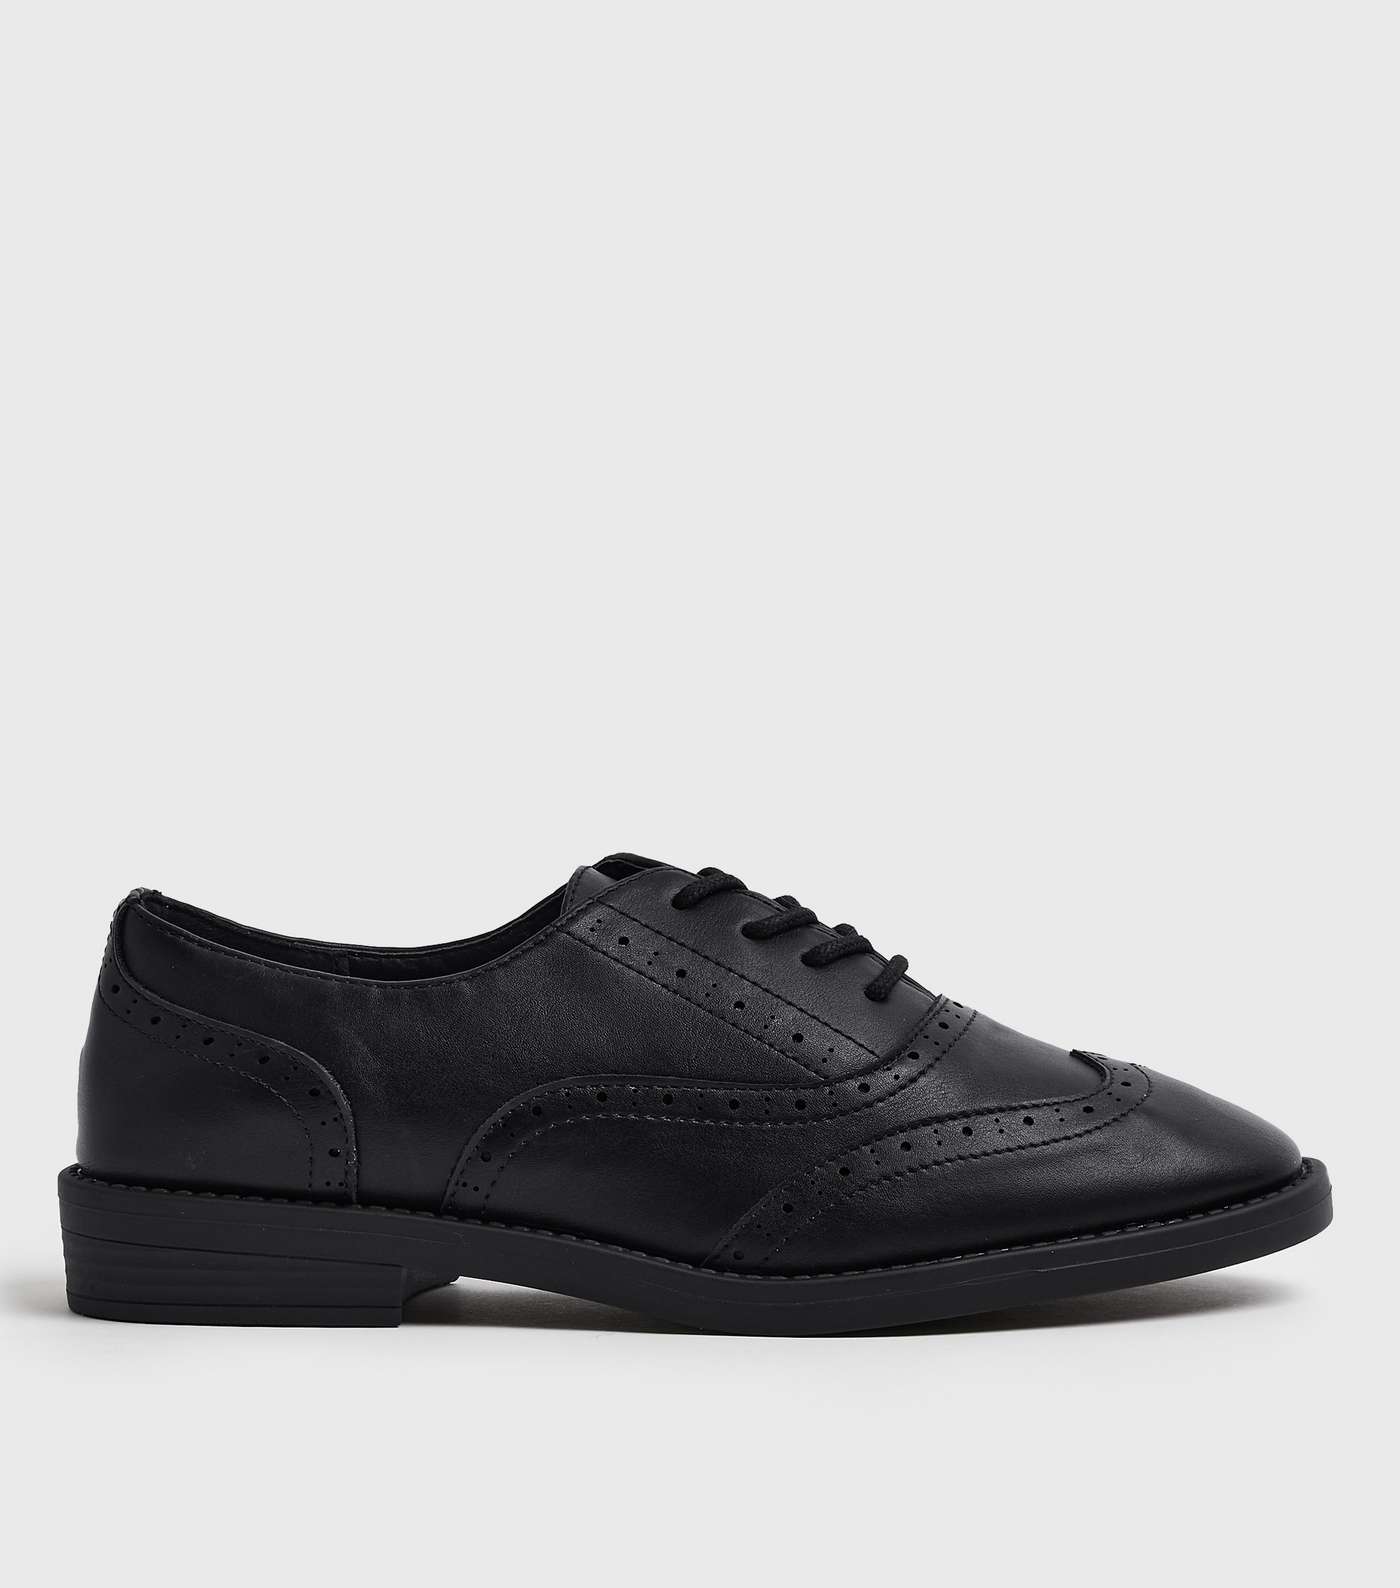 Black Leather-Look Lace Up Brogues 